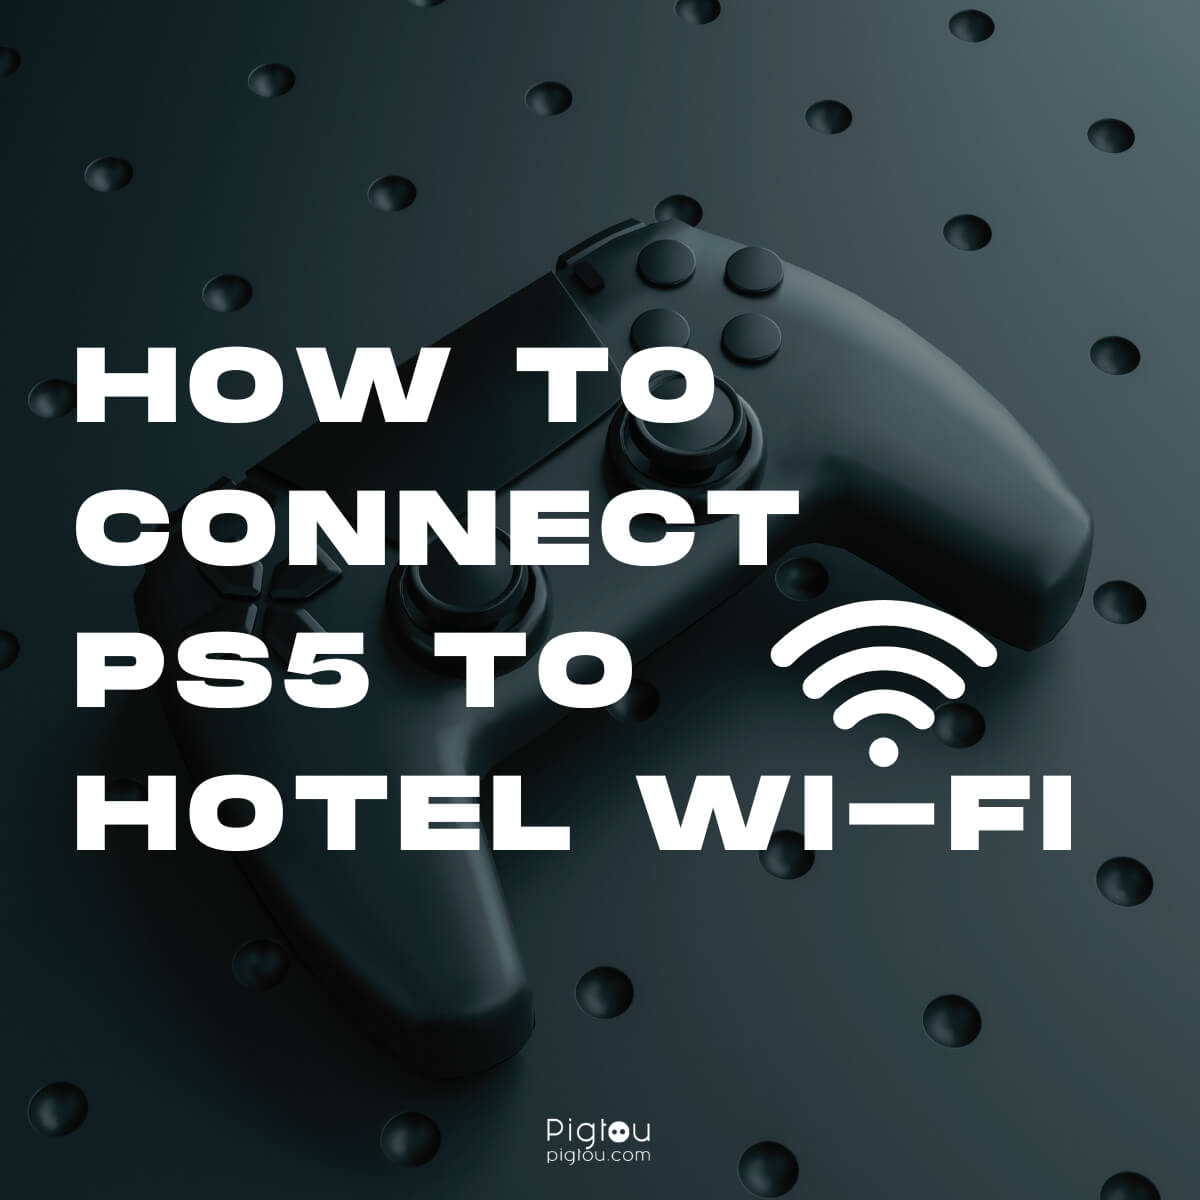 How To Connect PS5 to Hotel Wi-Fi